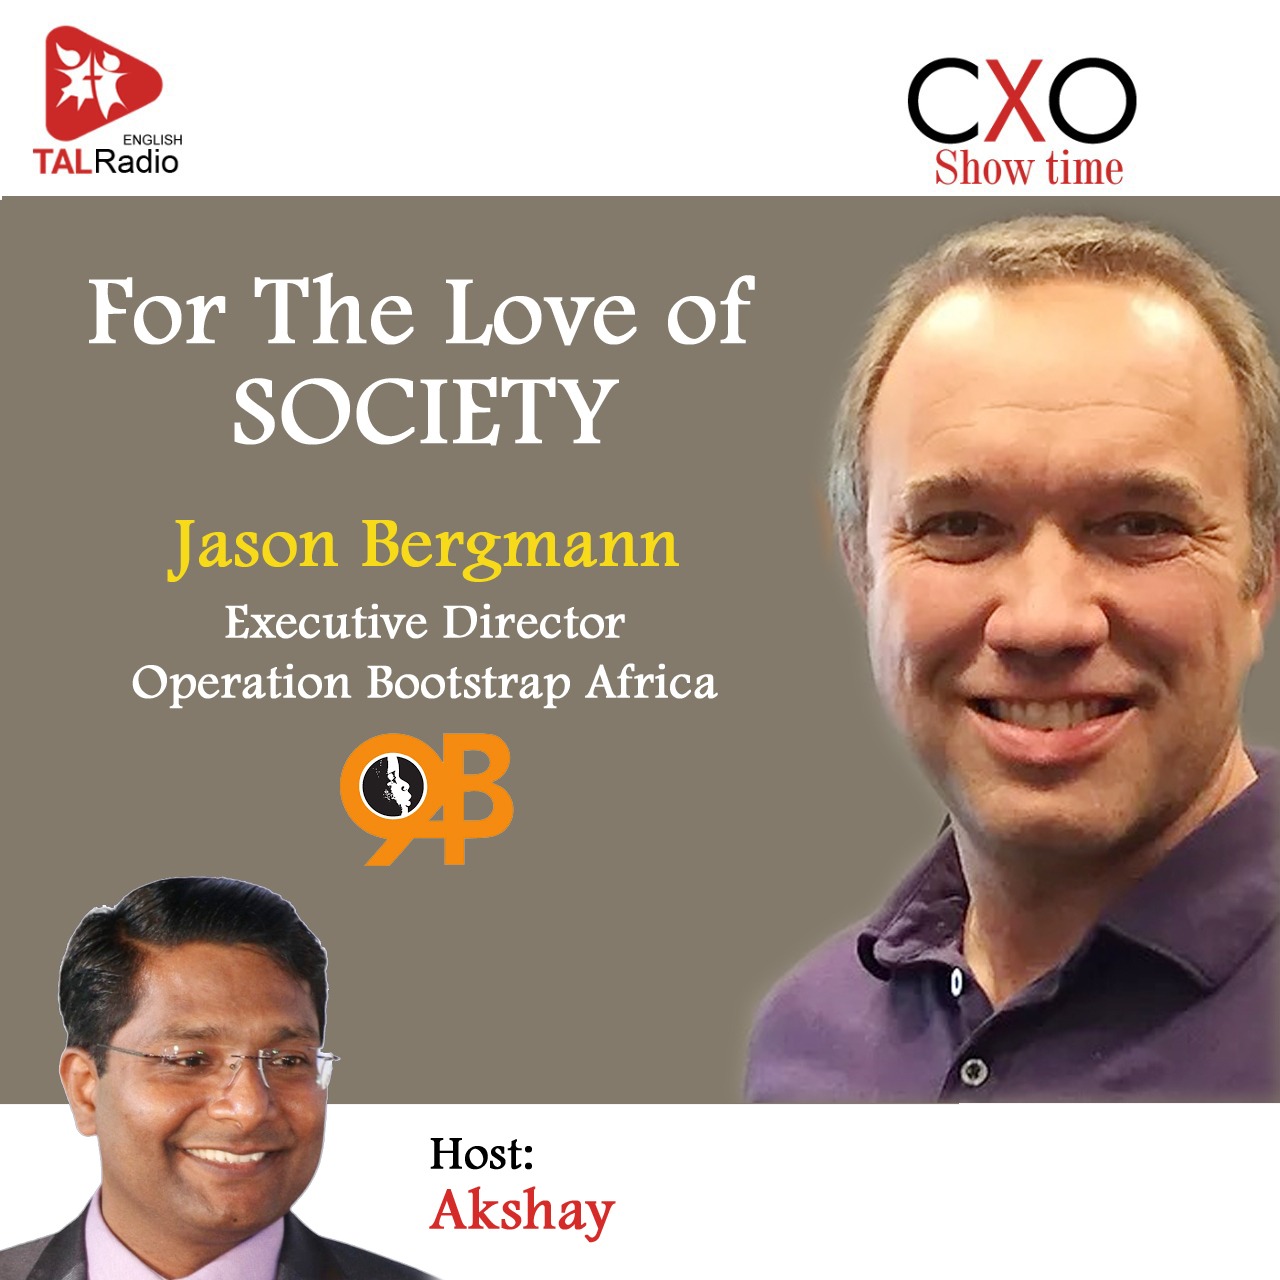 For The Love of Society | CXO Show Time